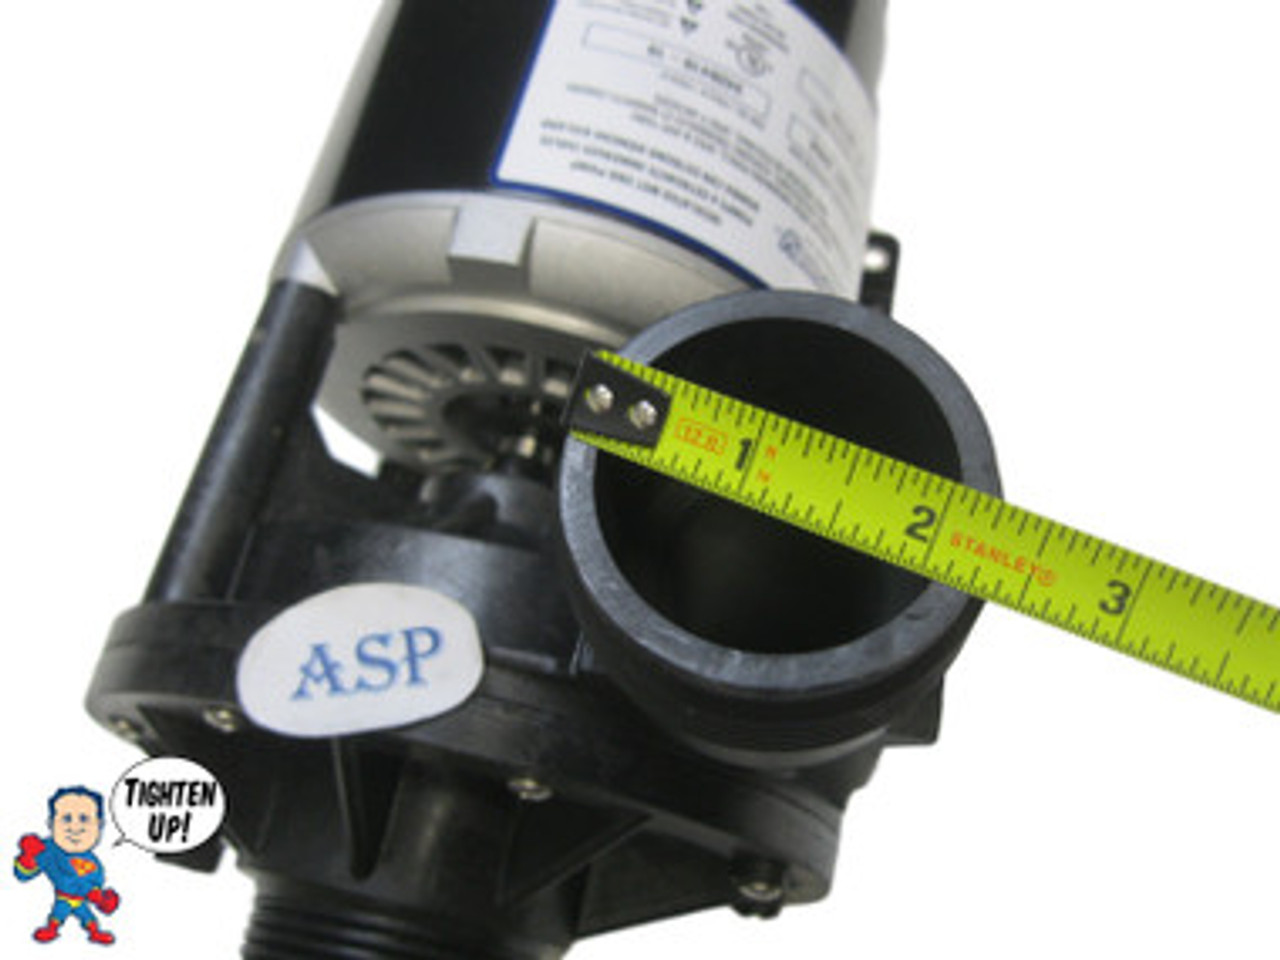 The inlet and outlet measure about 2 5/16" across the threads..
Wavemaster 3000, 39584, 34677, 04184, Complete Pump, 1.0HP, 115v, 48fr, 1-1/2", 1 or 2 Speed